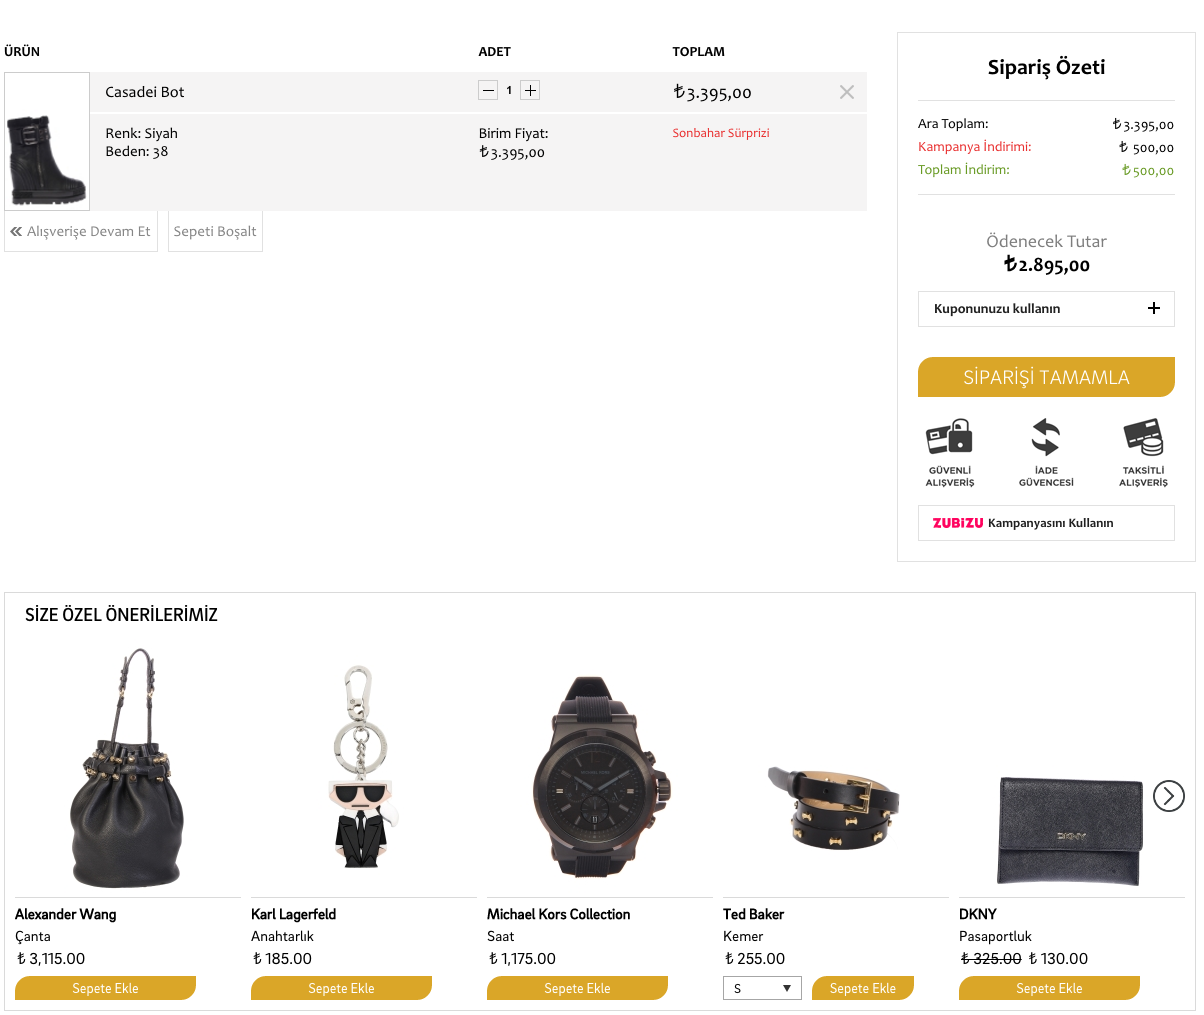 Cross Selling for eCommerce - A Tool To Increase Online Revenues